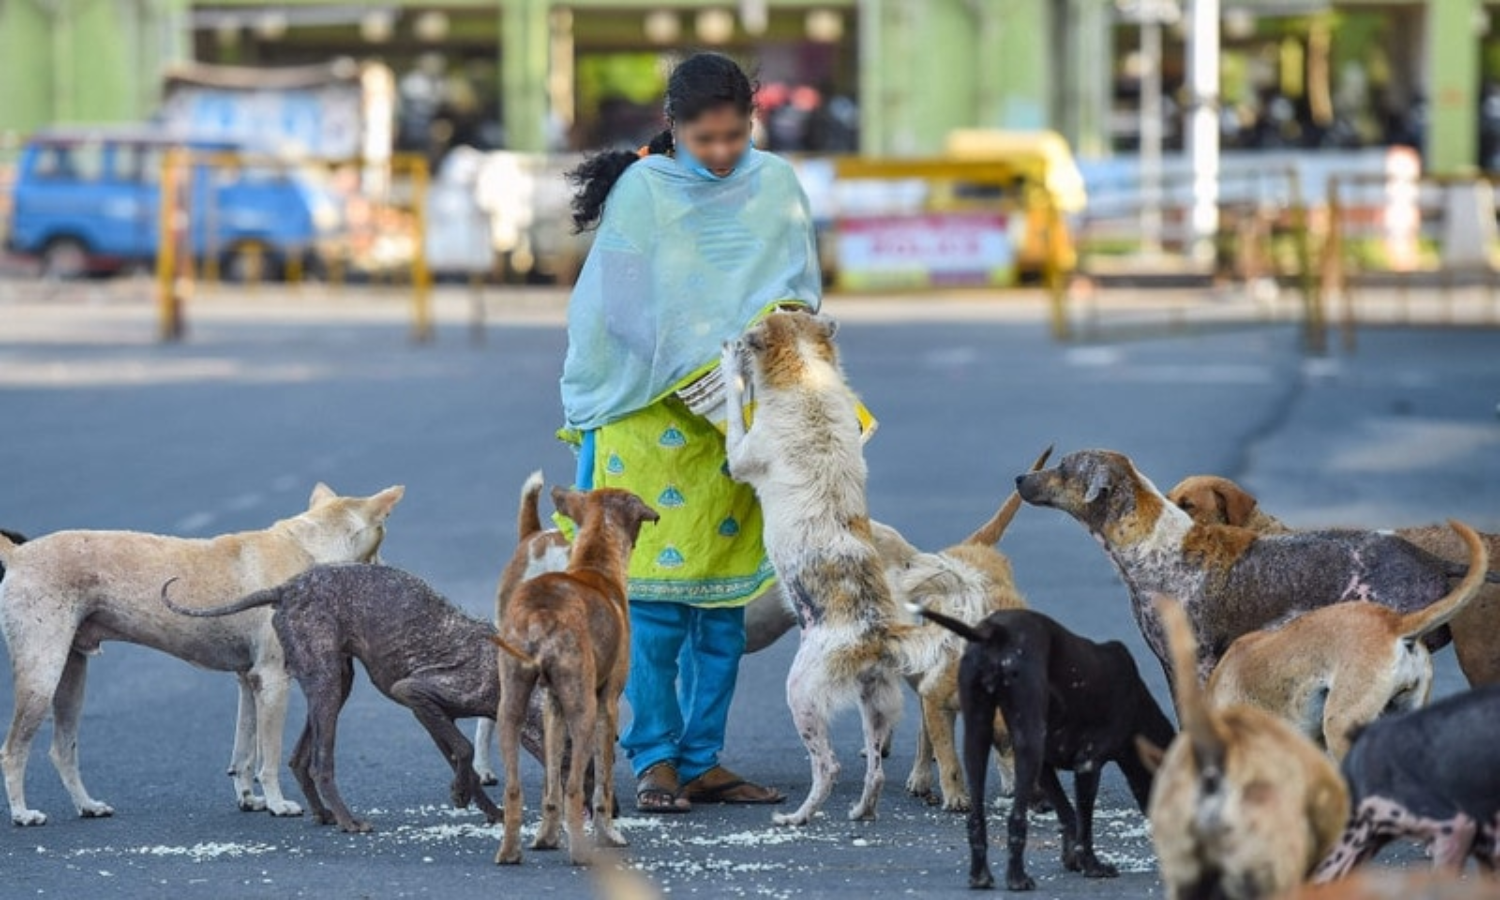 Provide General Treatment, Vaccination To Stray Animals: Madras High Court